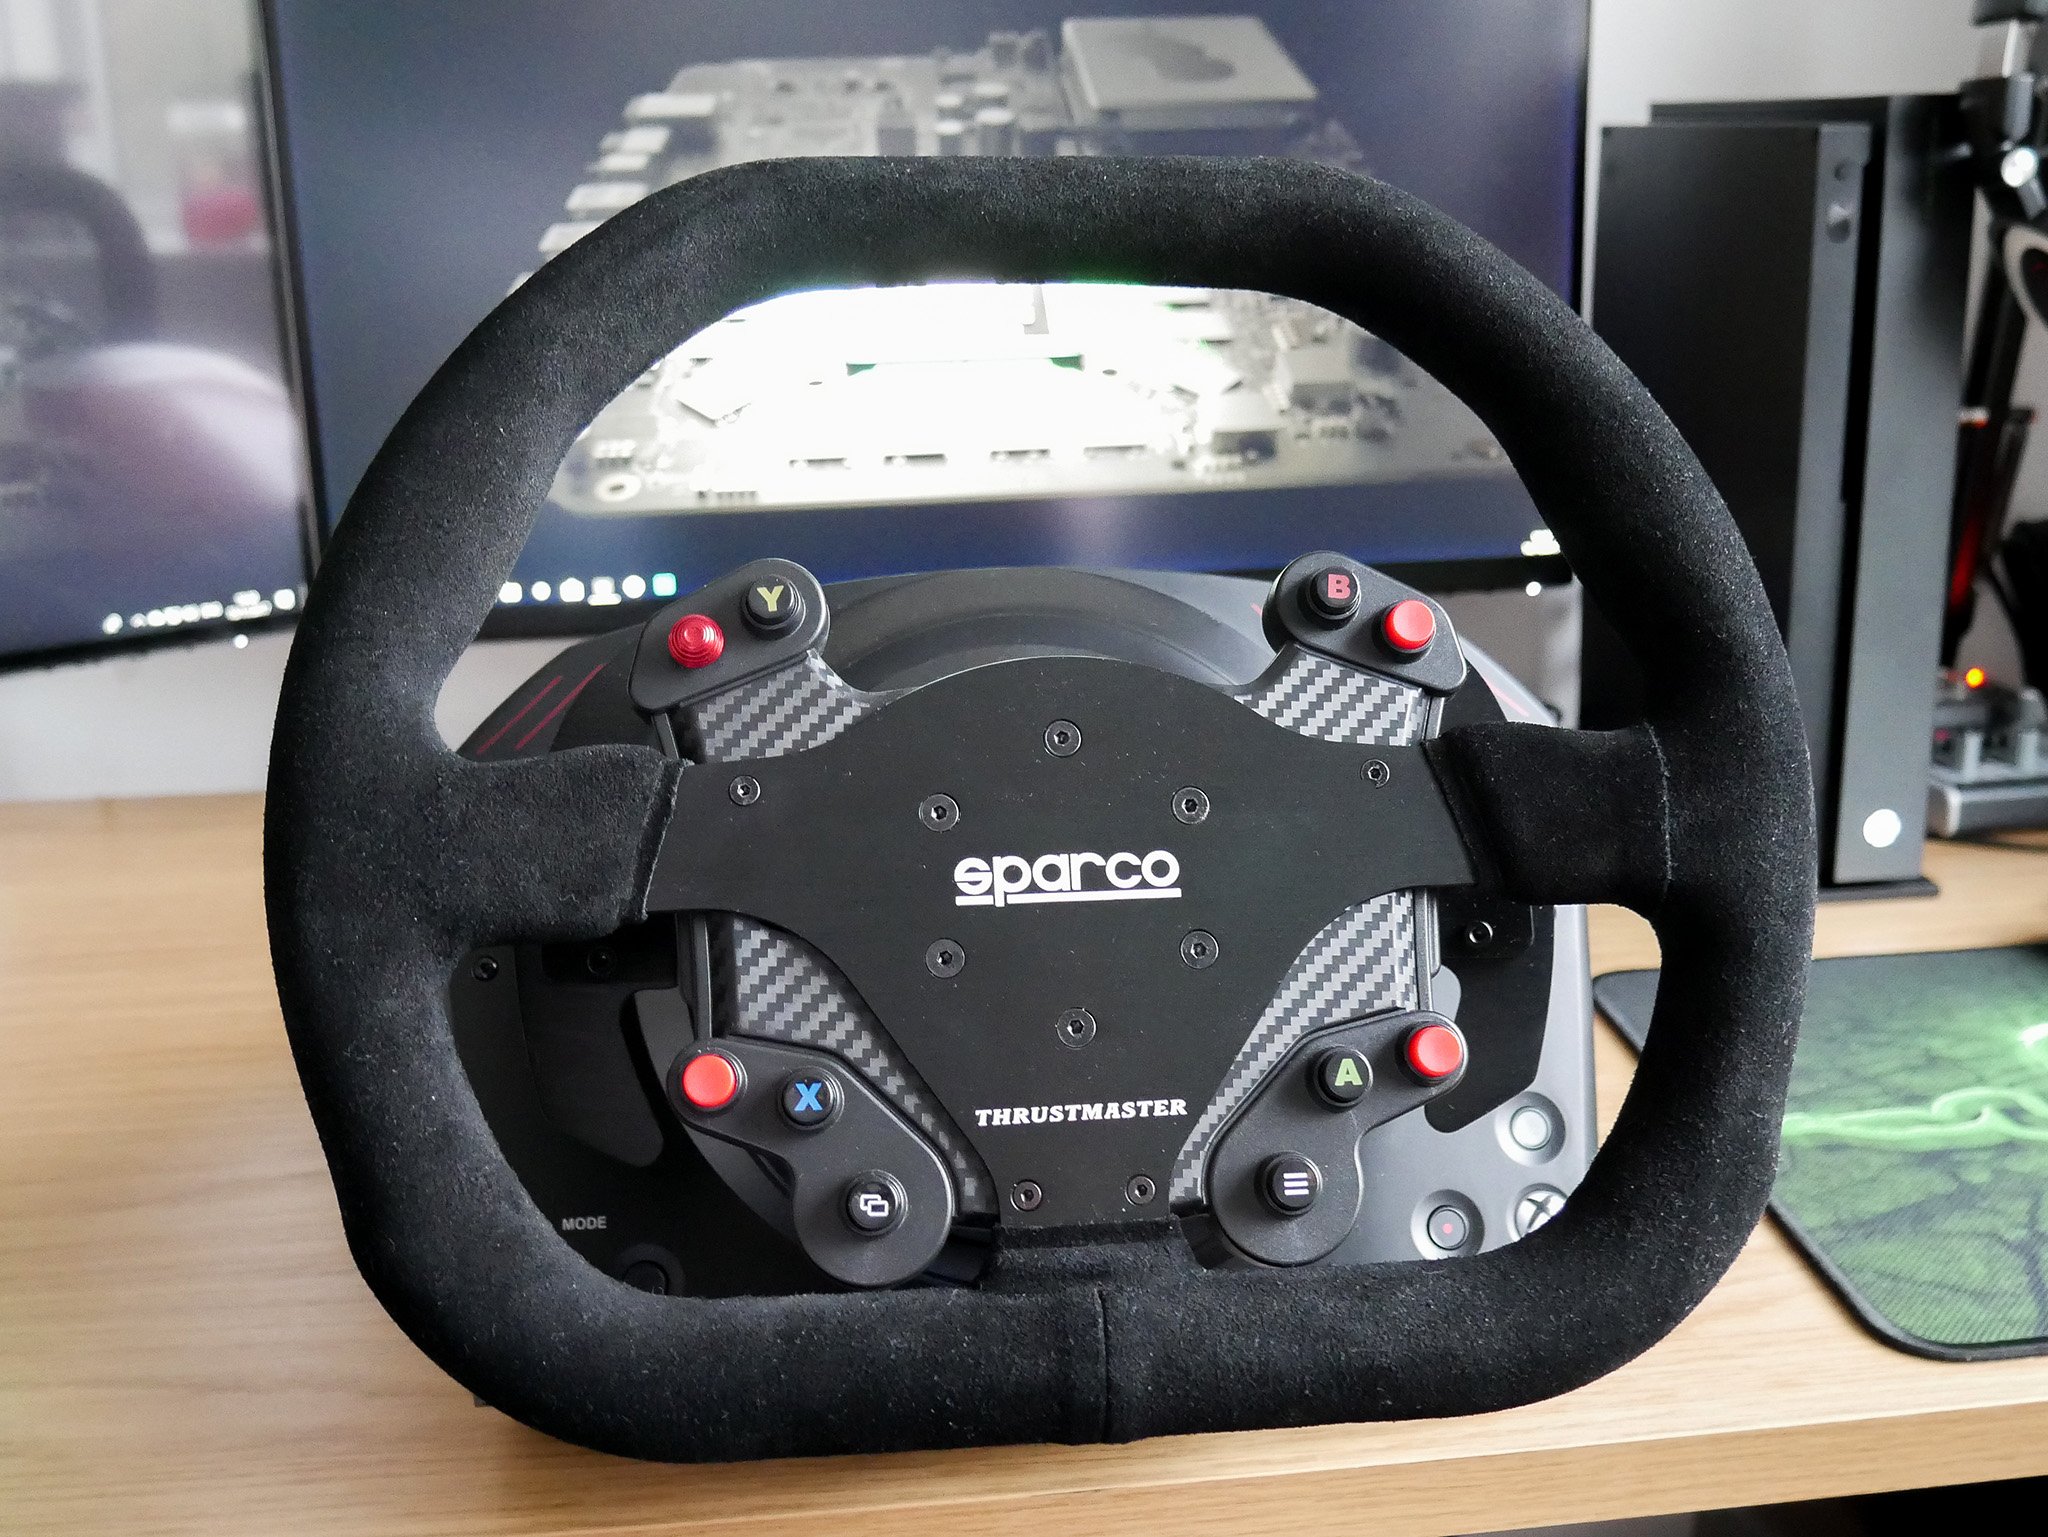 How To Set Up Your Thrustmaster Racing Wheel On Pc Windows